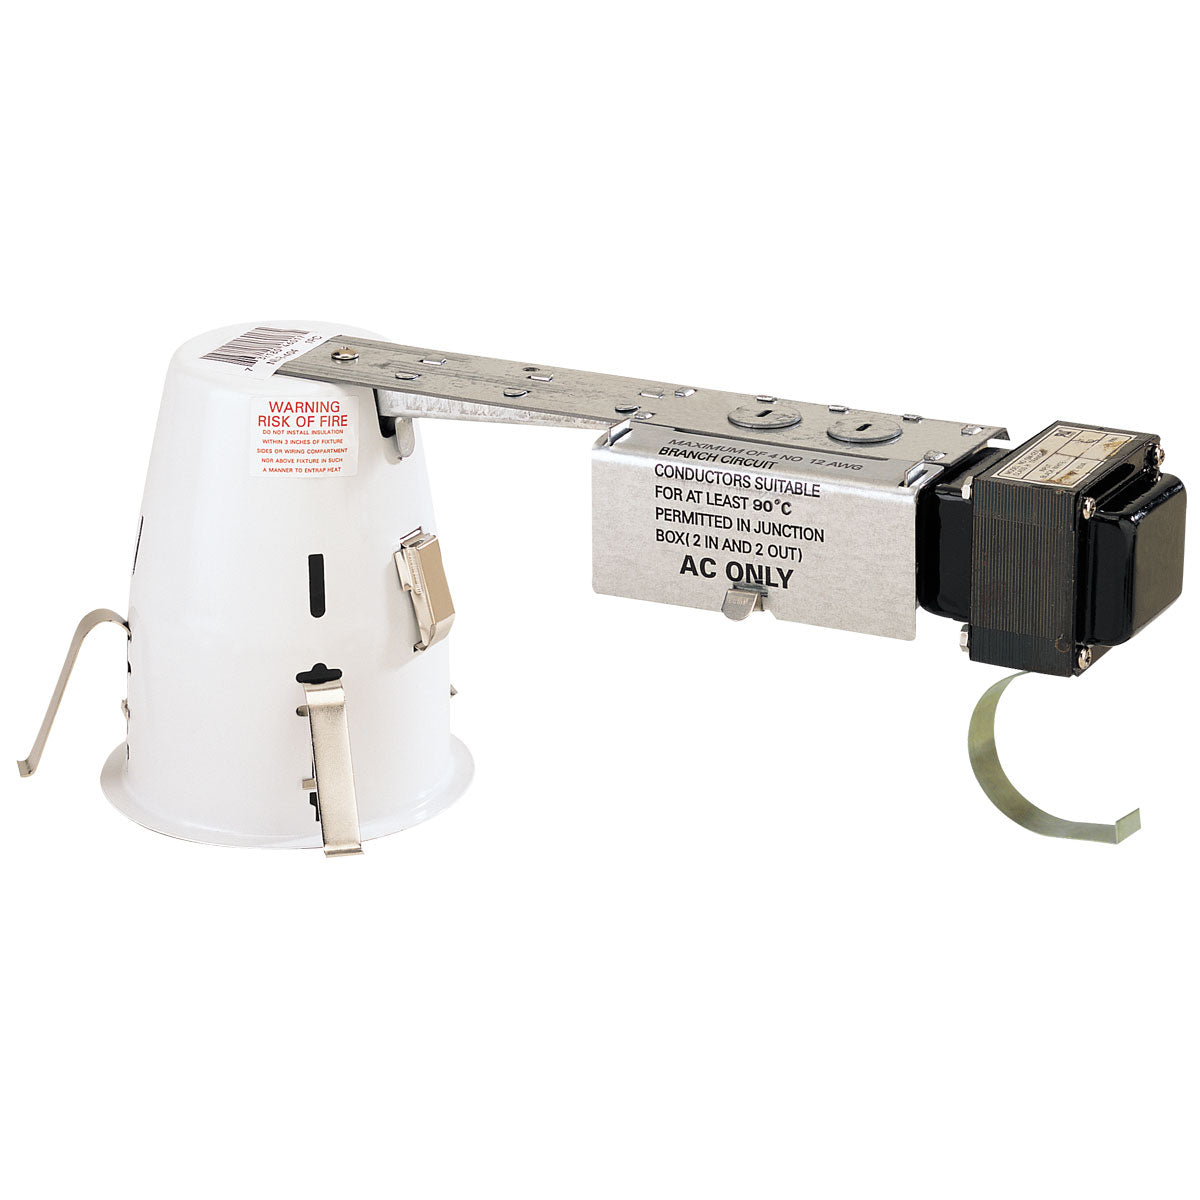 Nora Lighting NLR-404AT/2EL - Recessed - 4 Inch AT Low Voltage Housing, 277V/12V Elect. Transformer, Rated for 50W